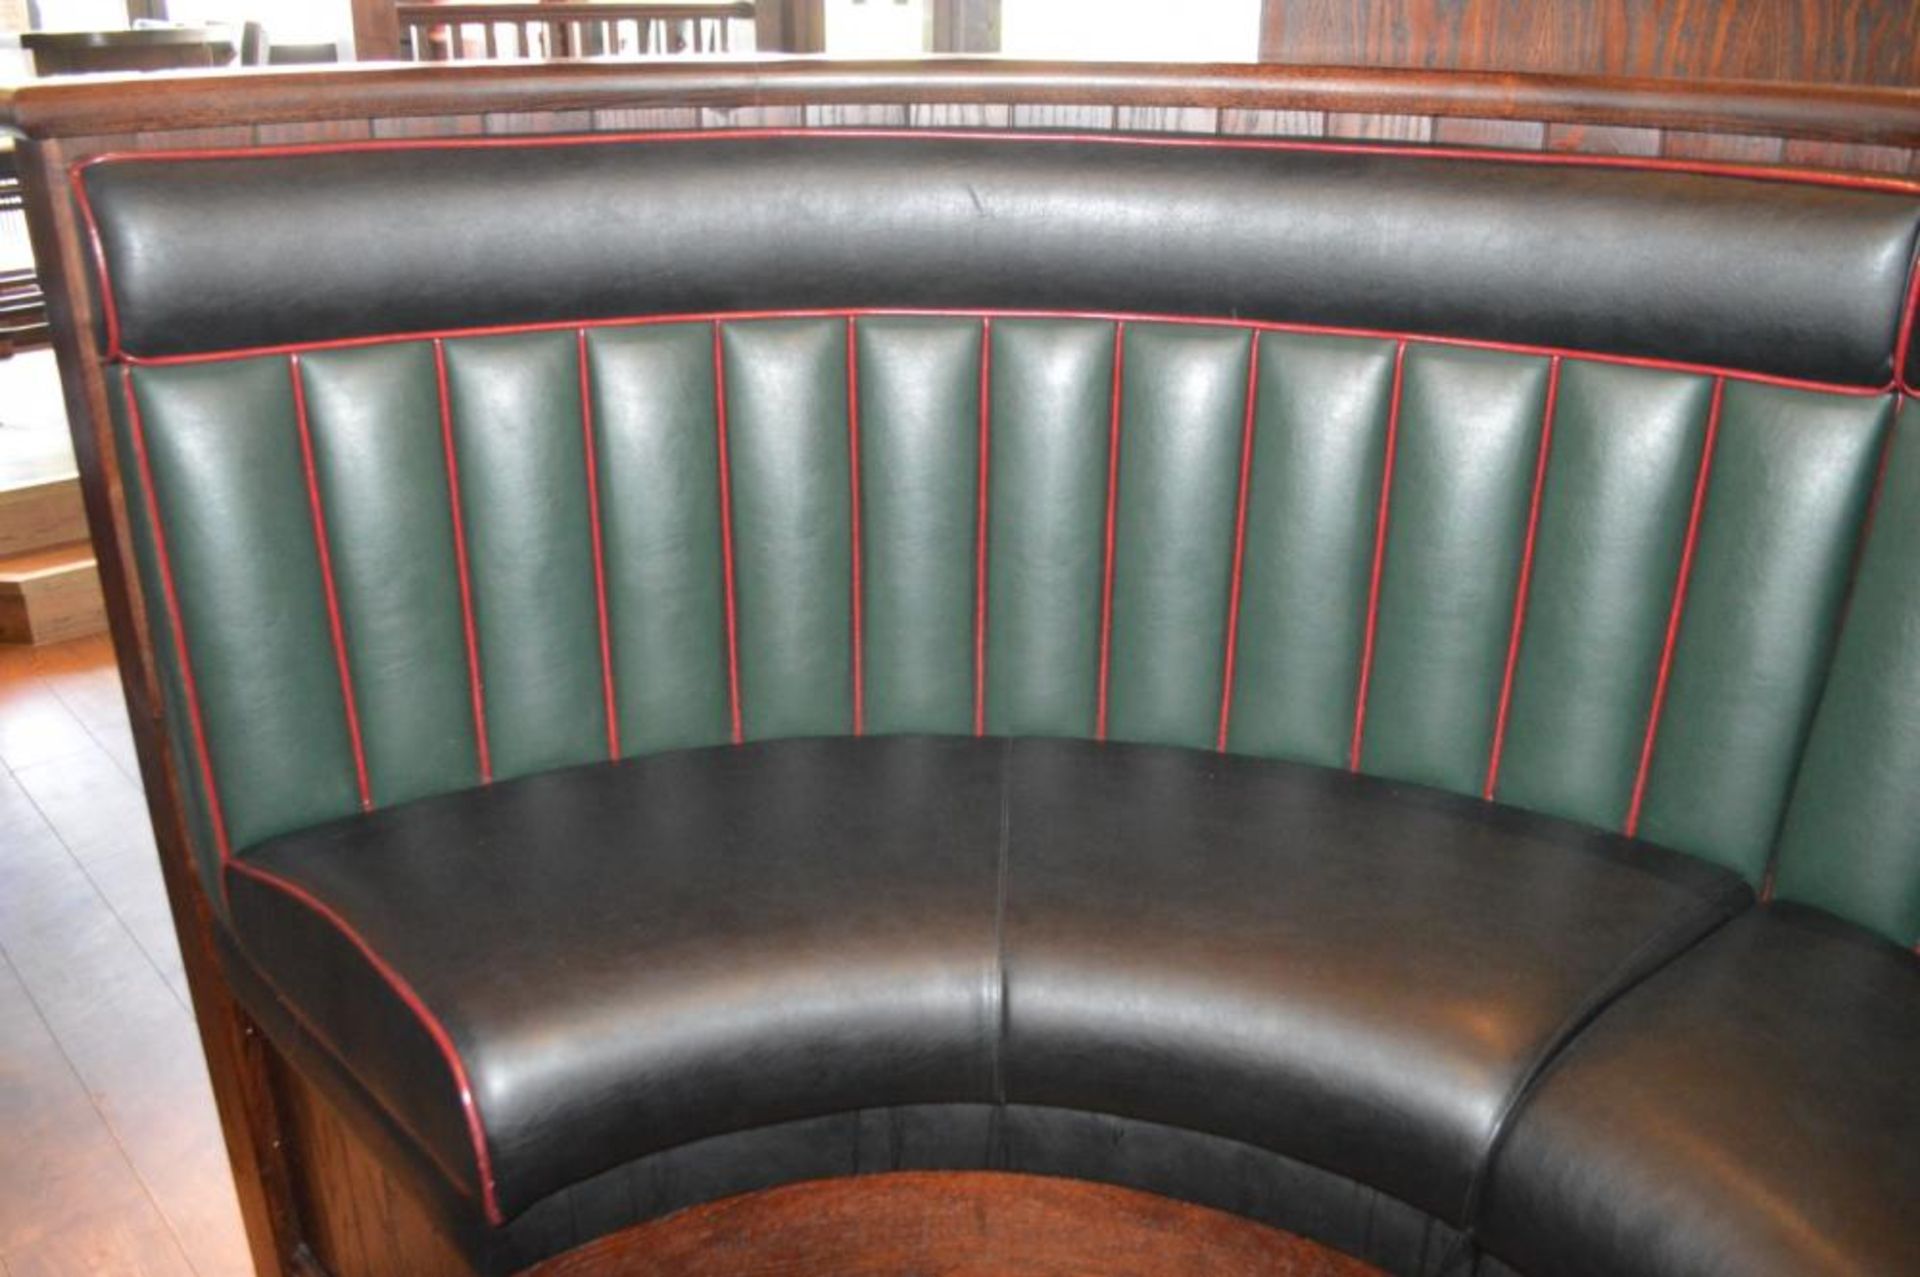 5 x Contemporary Half Circle High Seat Booths - Features a Leather Upholstery in Green and Black, - Image 7 of 11